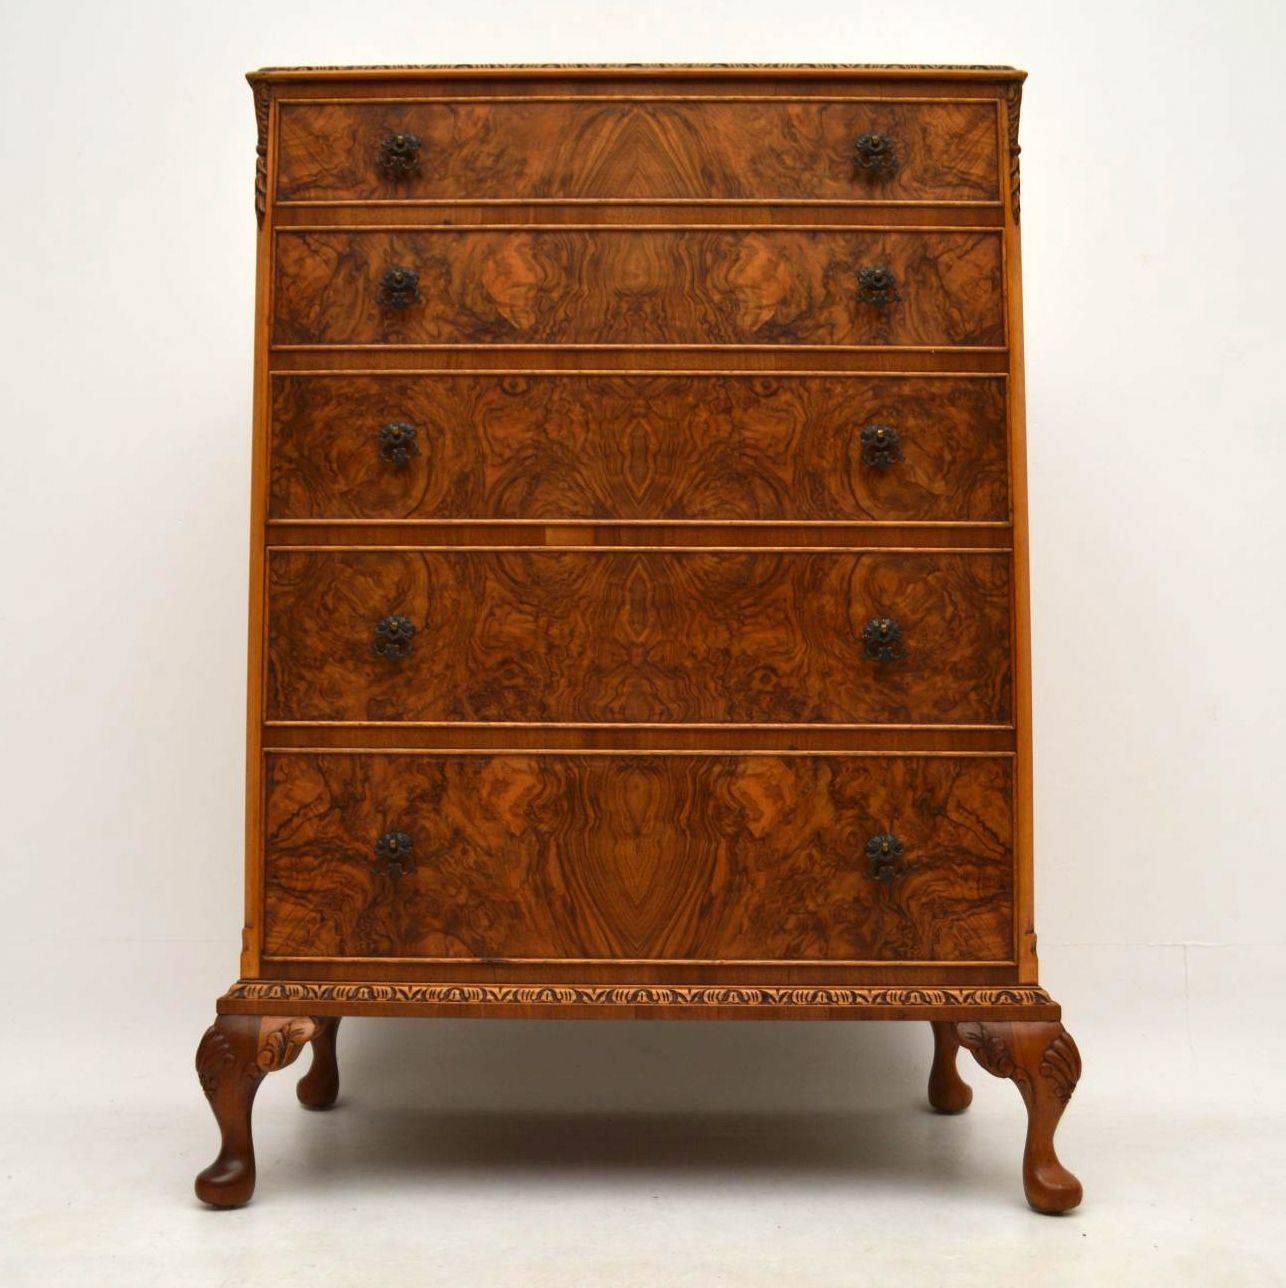 English Antique Burr Walnut Queen Anne Style Chest of Drawers